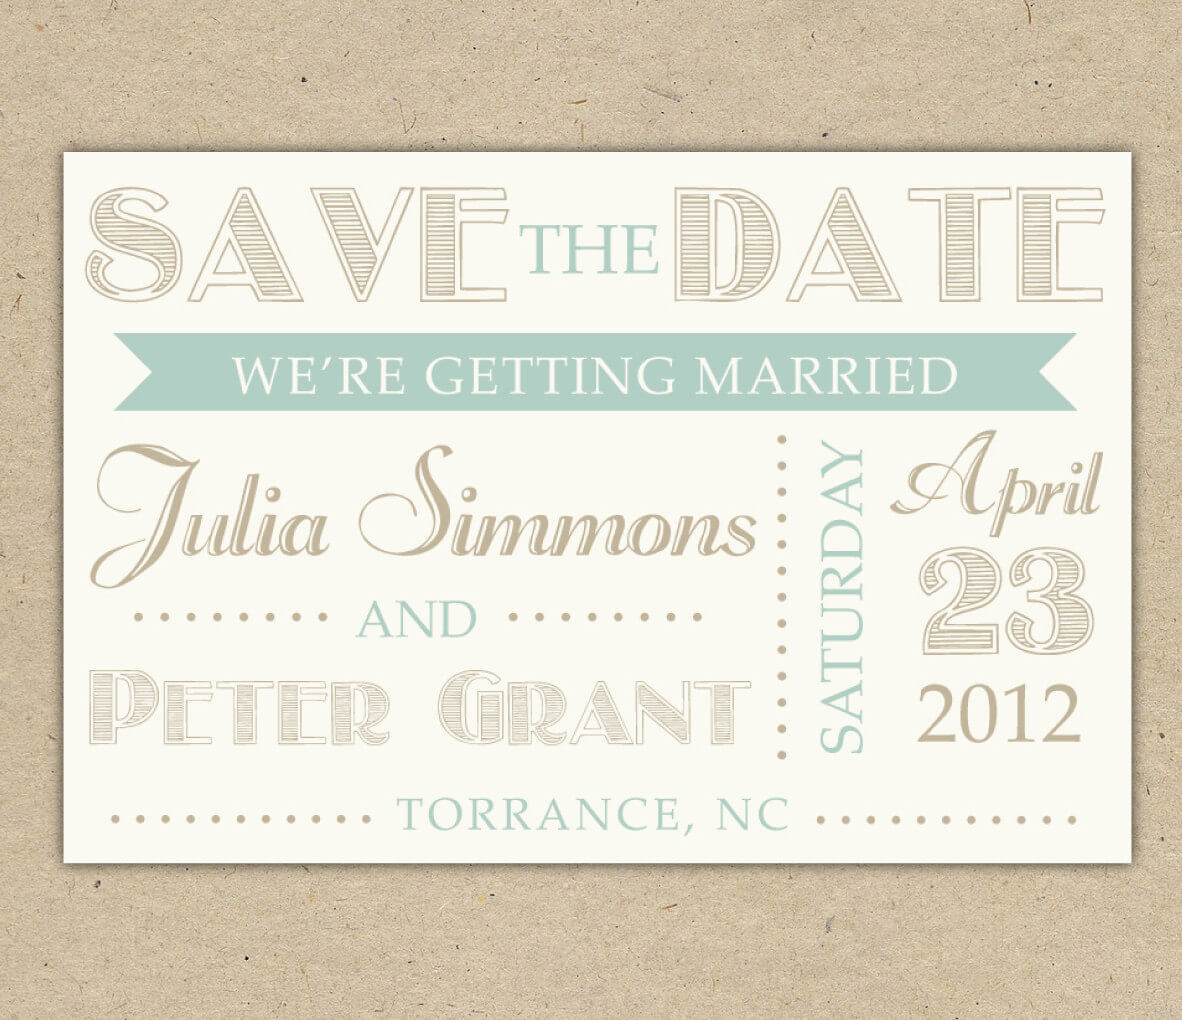 Save The Date Cards Templates For Weddings With Regard To Save The Date Cards Templates